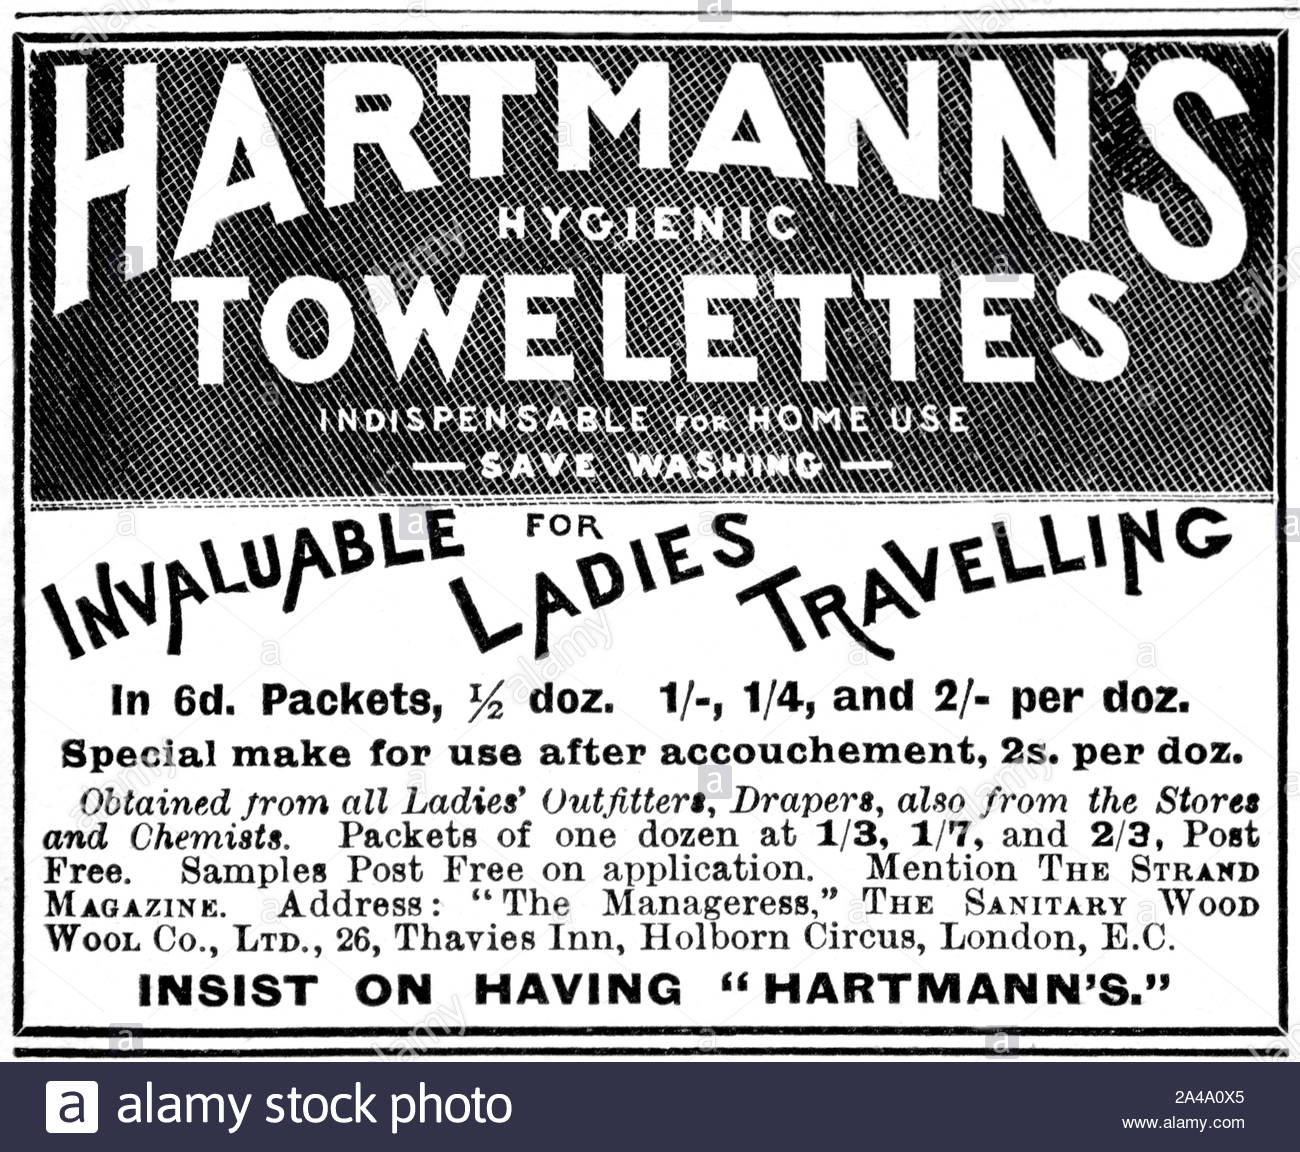 Victorian era, Hartmann's hygienic towelettes, vintage advertising from 1897 Stock Photo